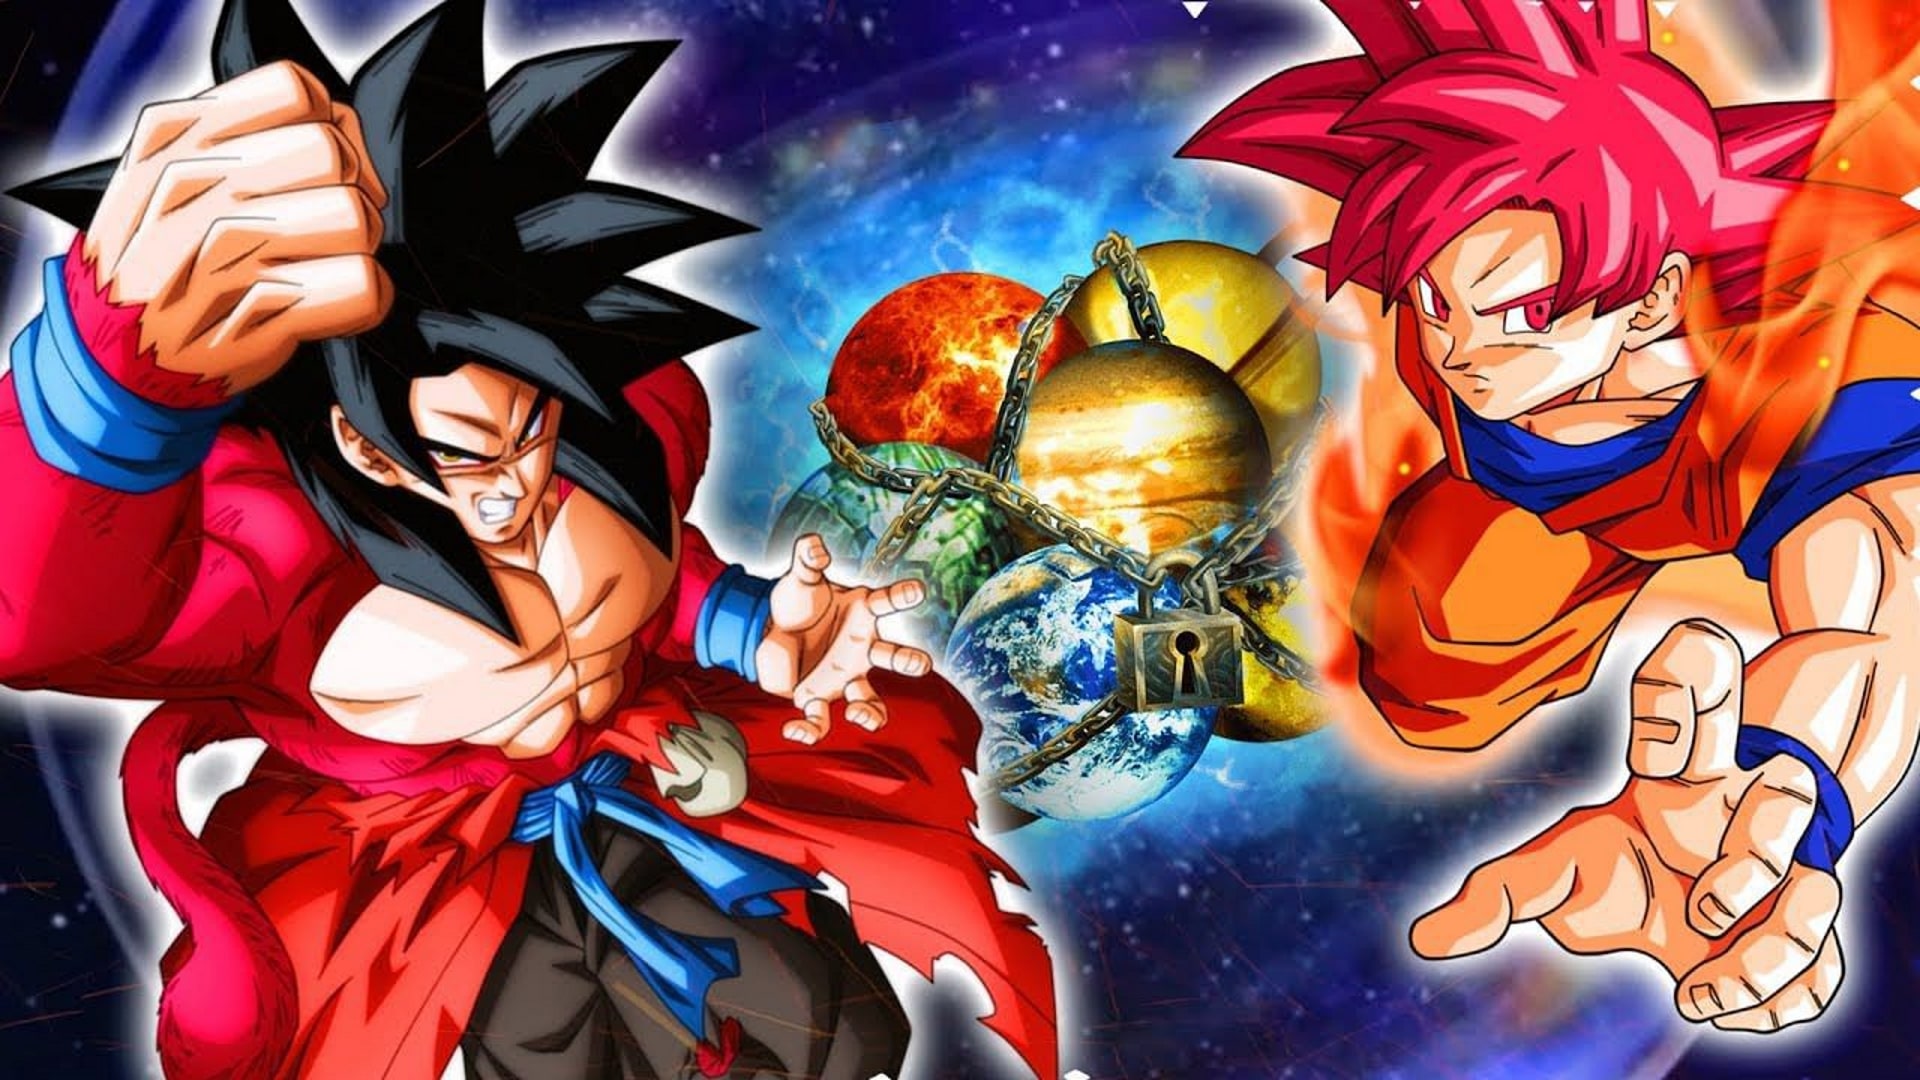 Super Dragon Ball Heroes - Season 3 1 - Watch here without ADS and